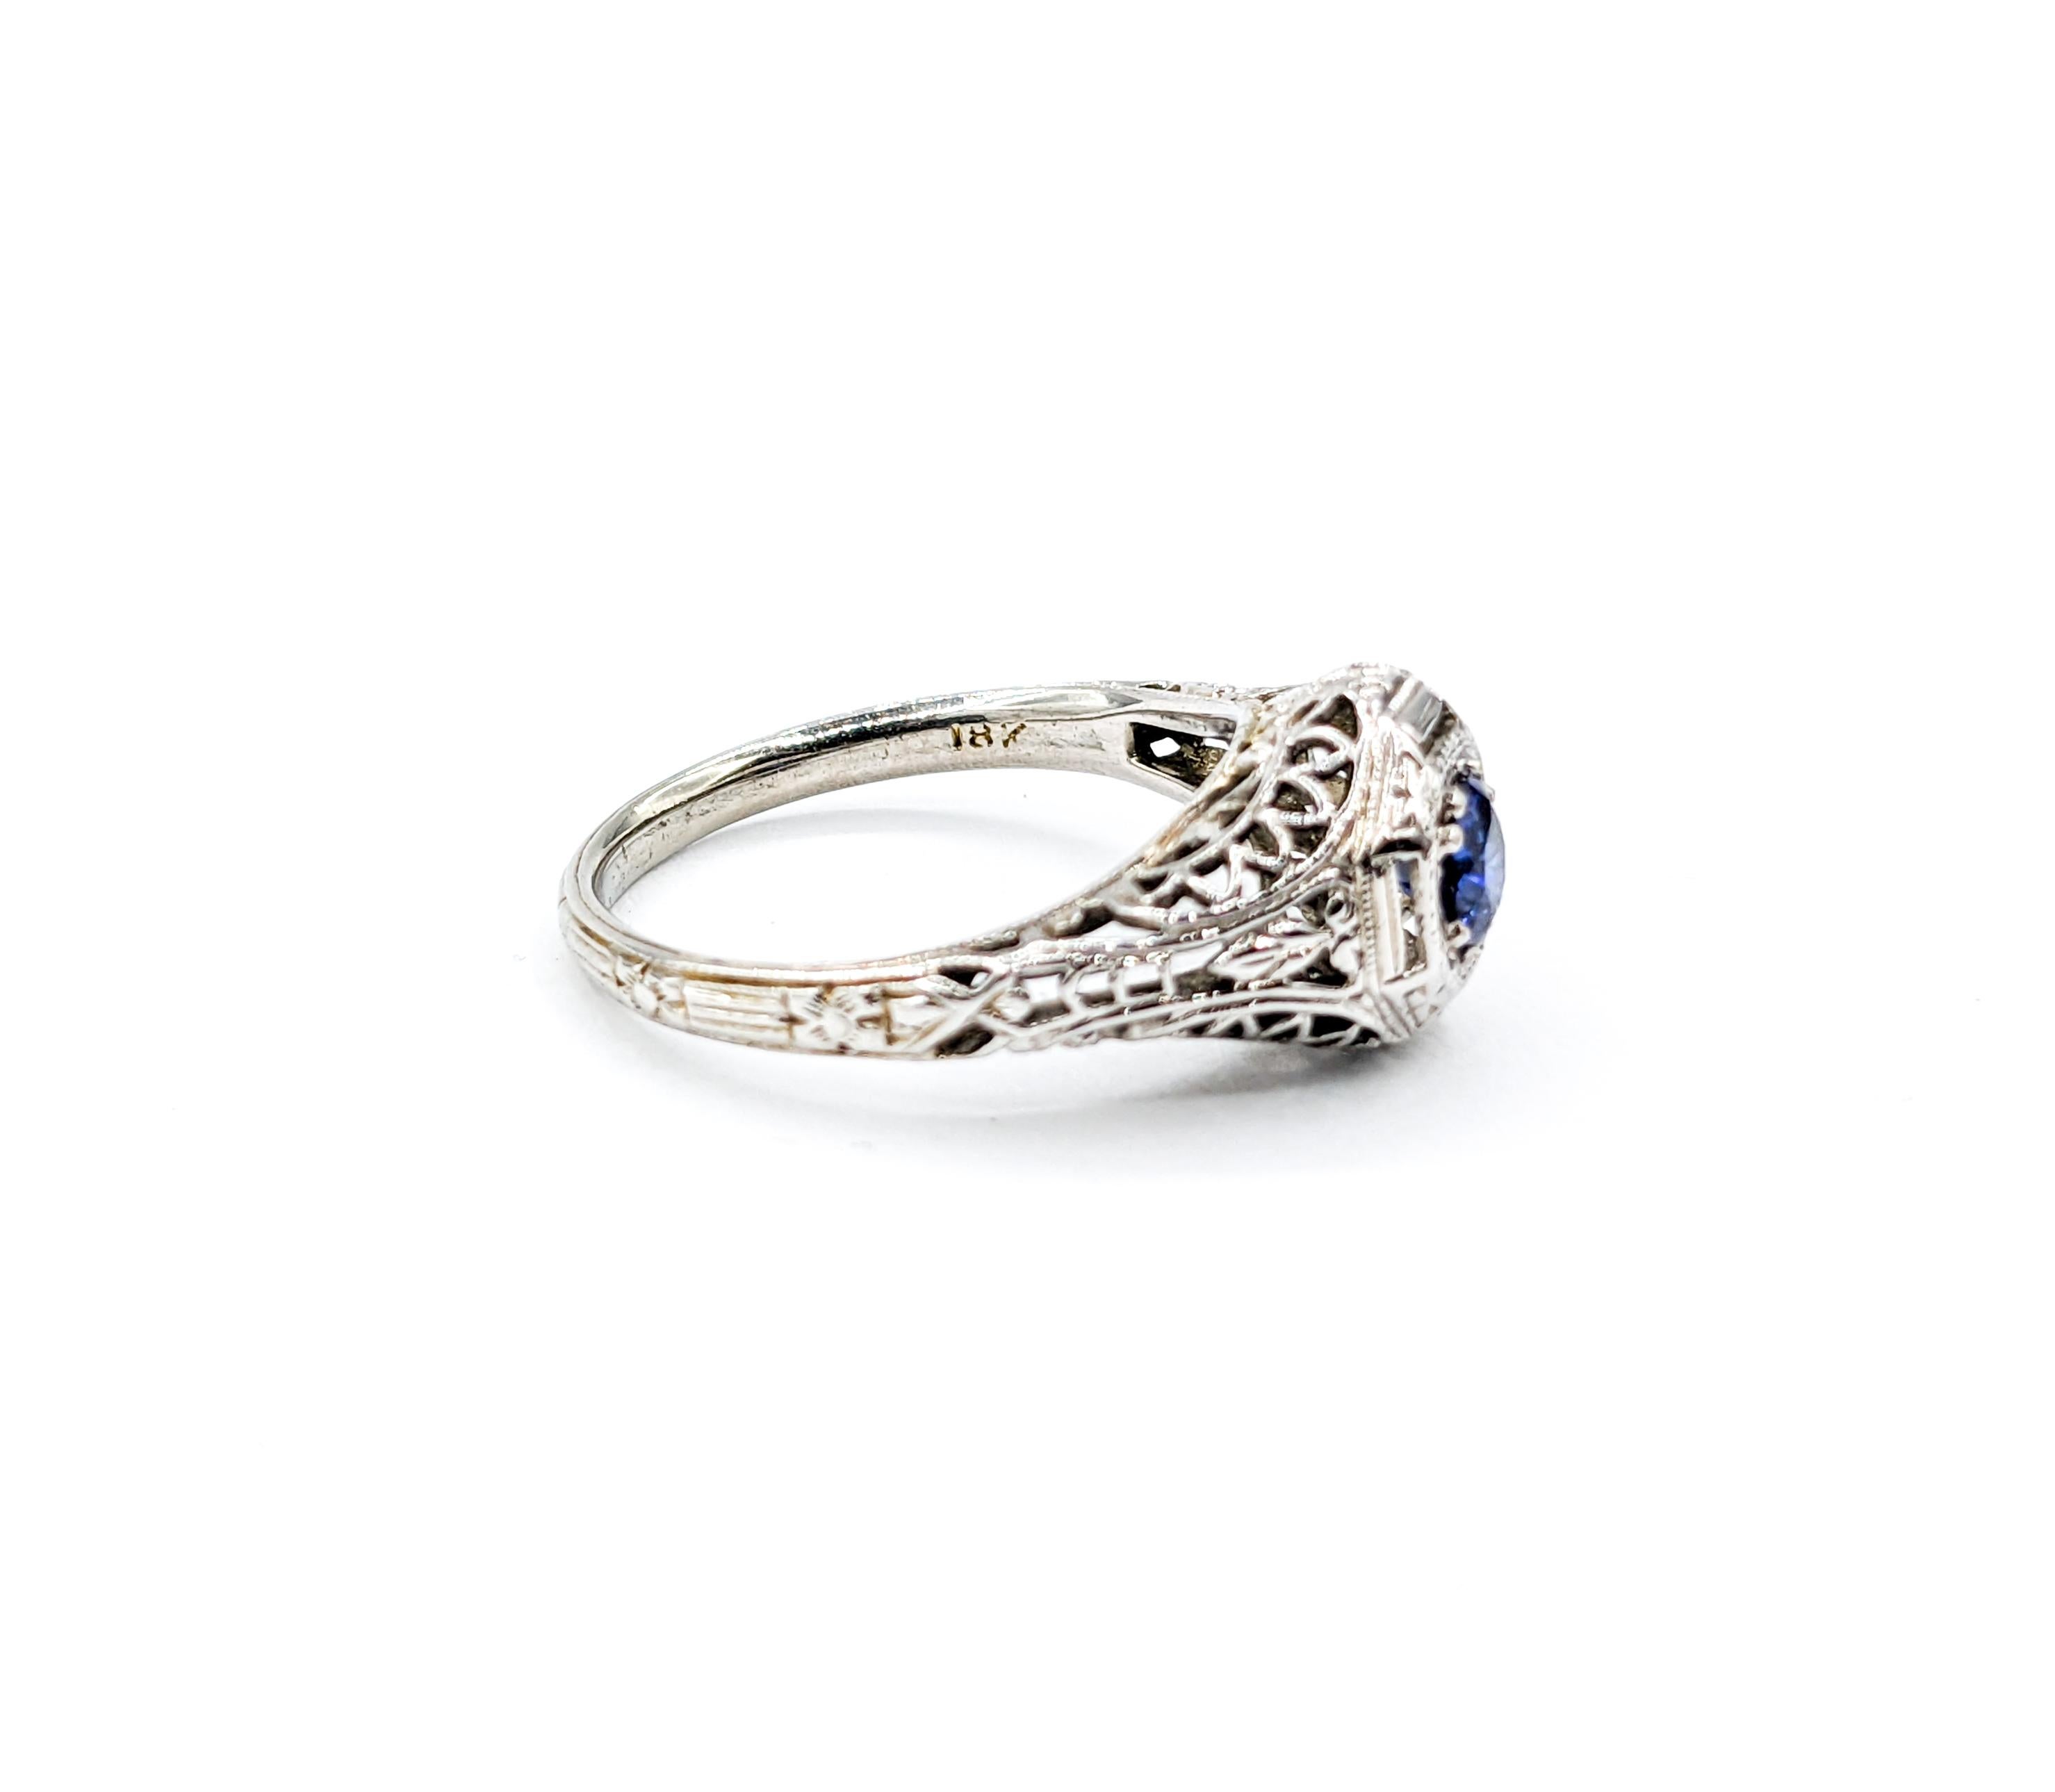 Antique Art Deco Filigree Sapphire Ring 18kt White Gold In Excellent Condition For Sale In Bloomington, MN